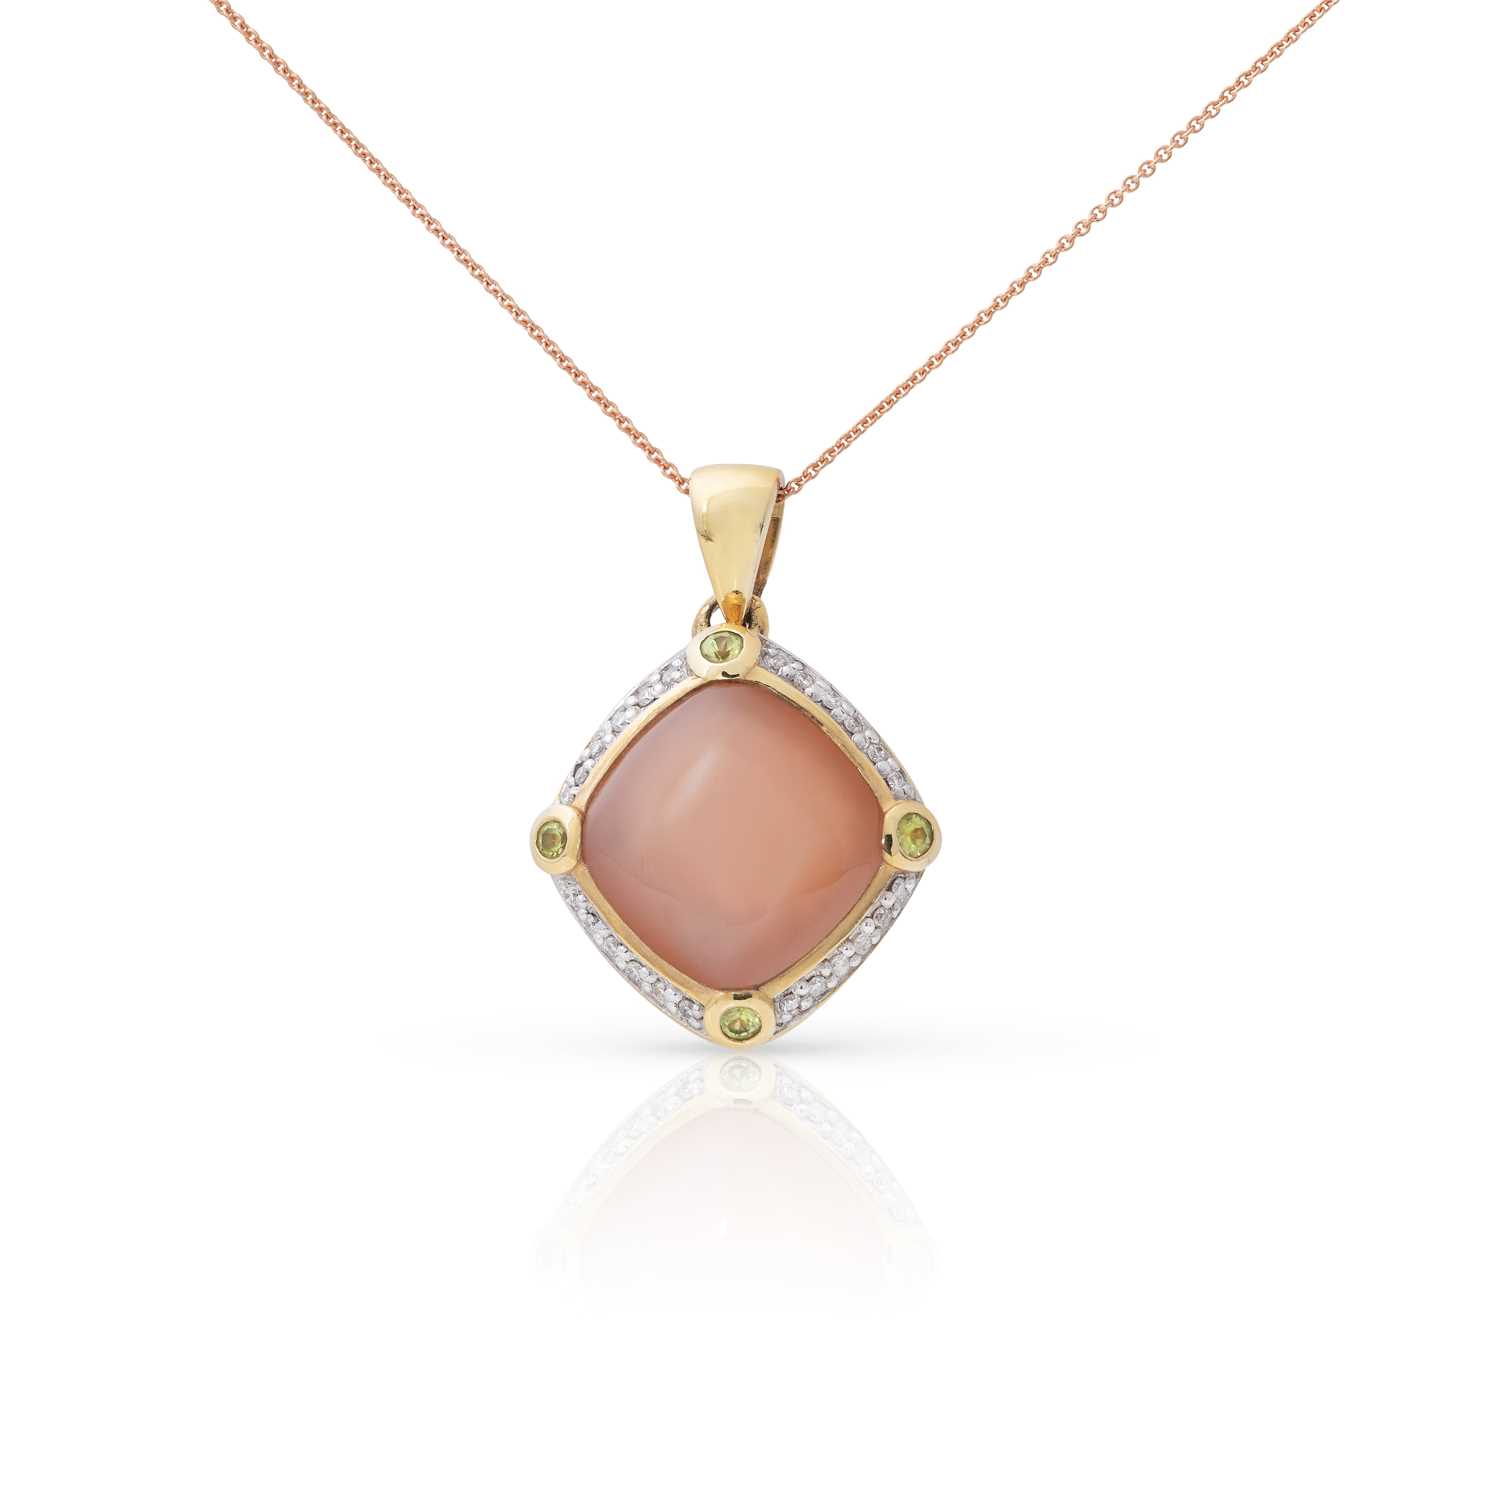 Lot 185 - Gold Pendant with Pink Moonstone and Diamonds on Gold Necklace